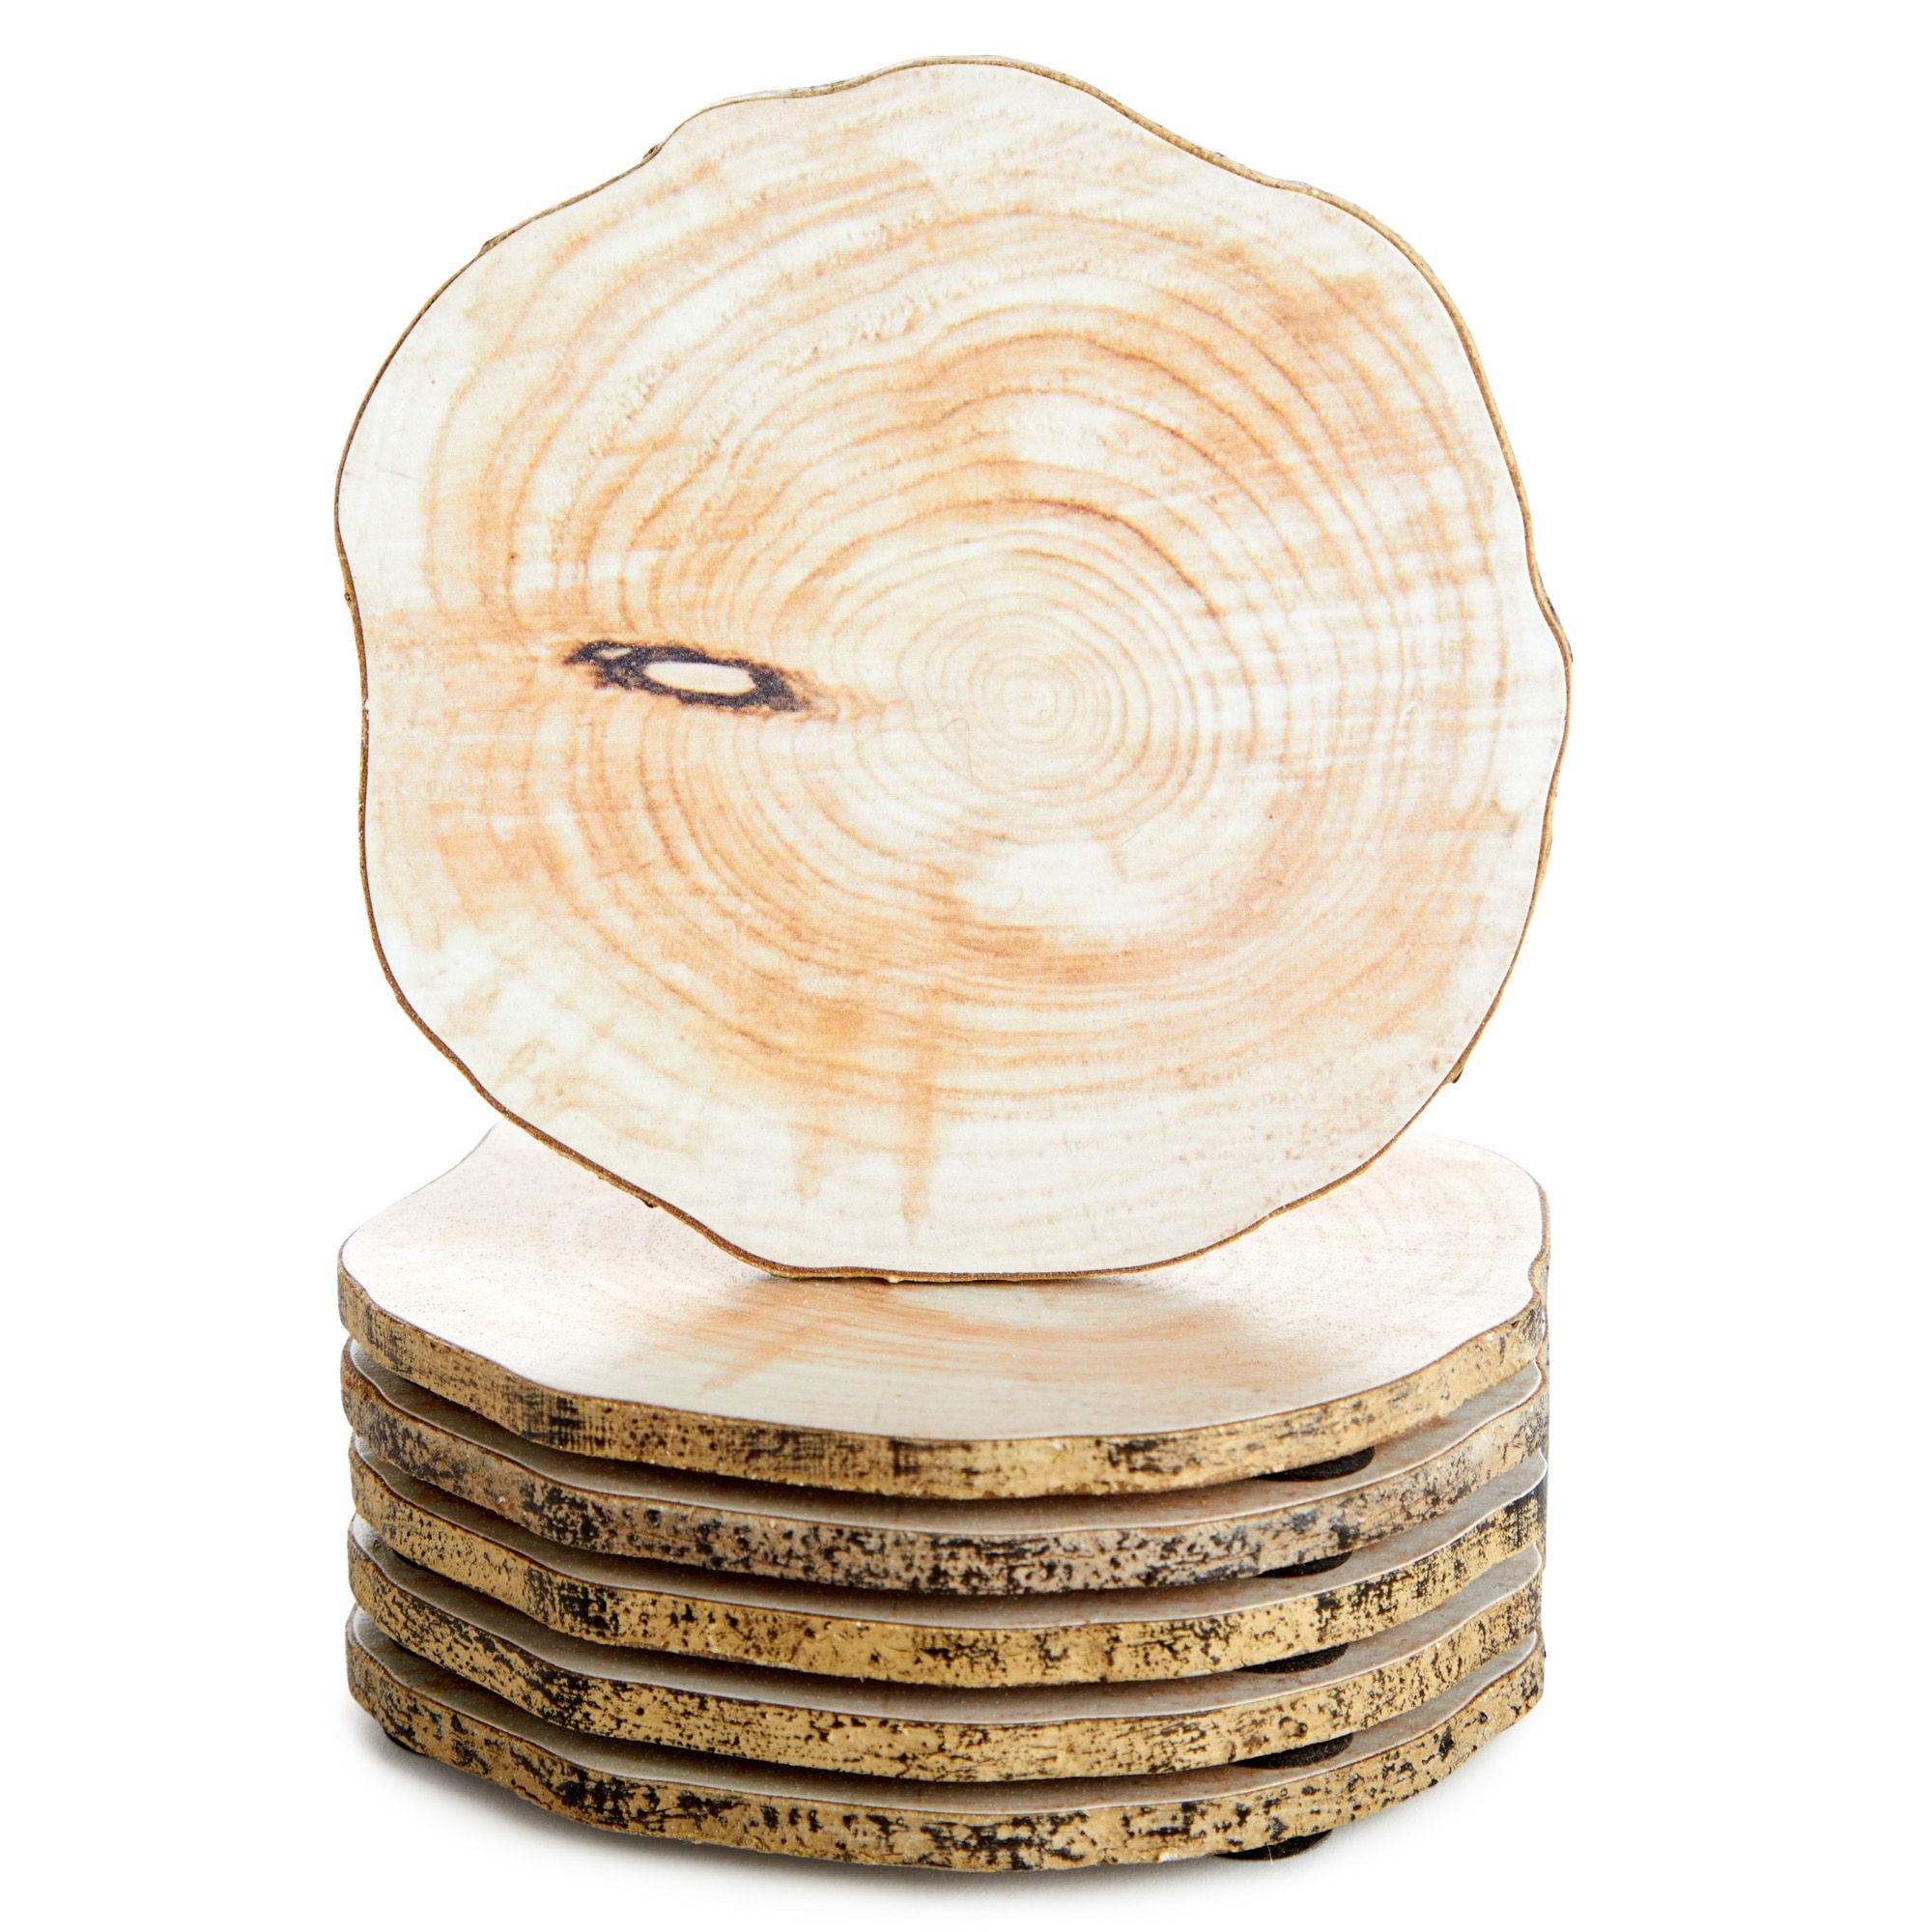 Home Basics Pine Wood Square Coasters with Absorbent Cork Insert, (Set of  6), and Holder 